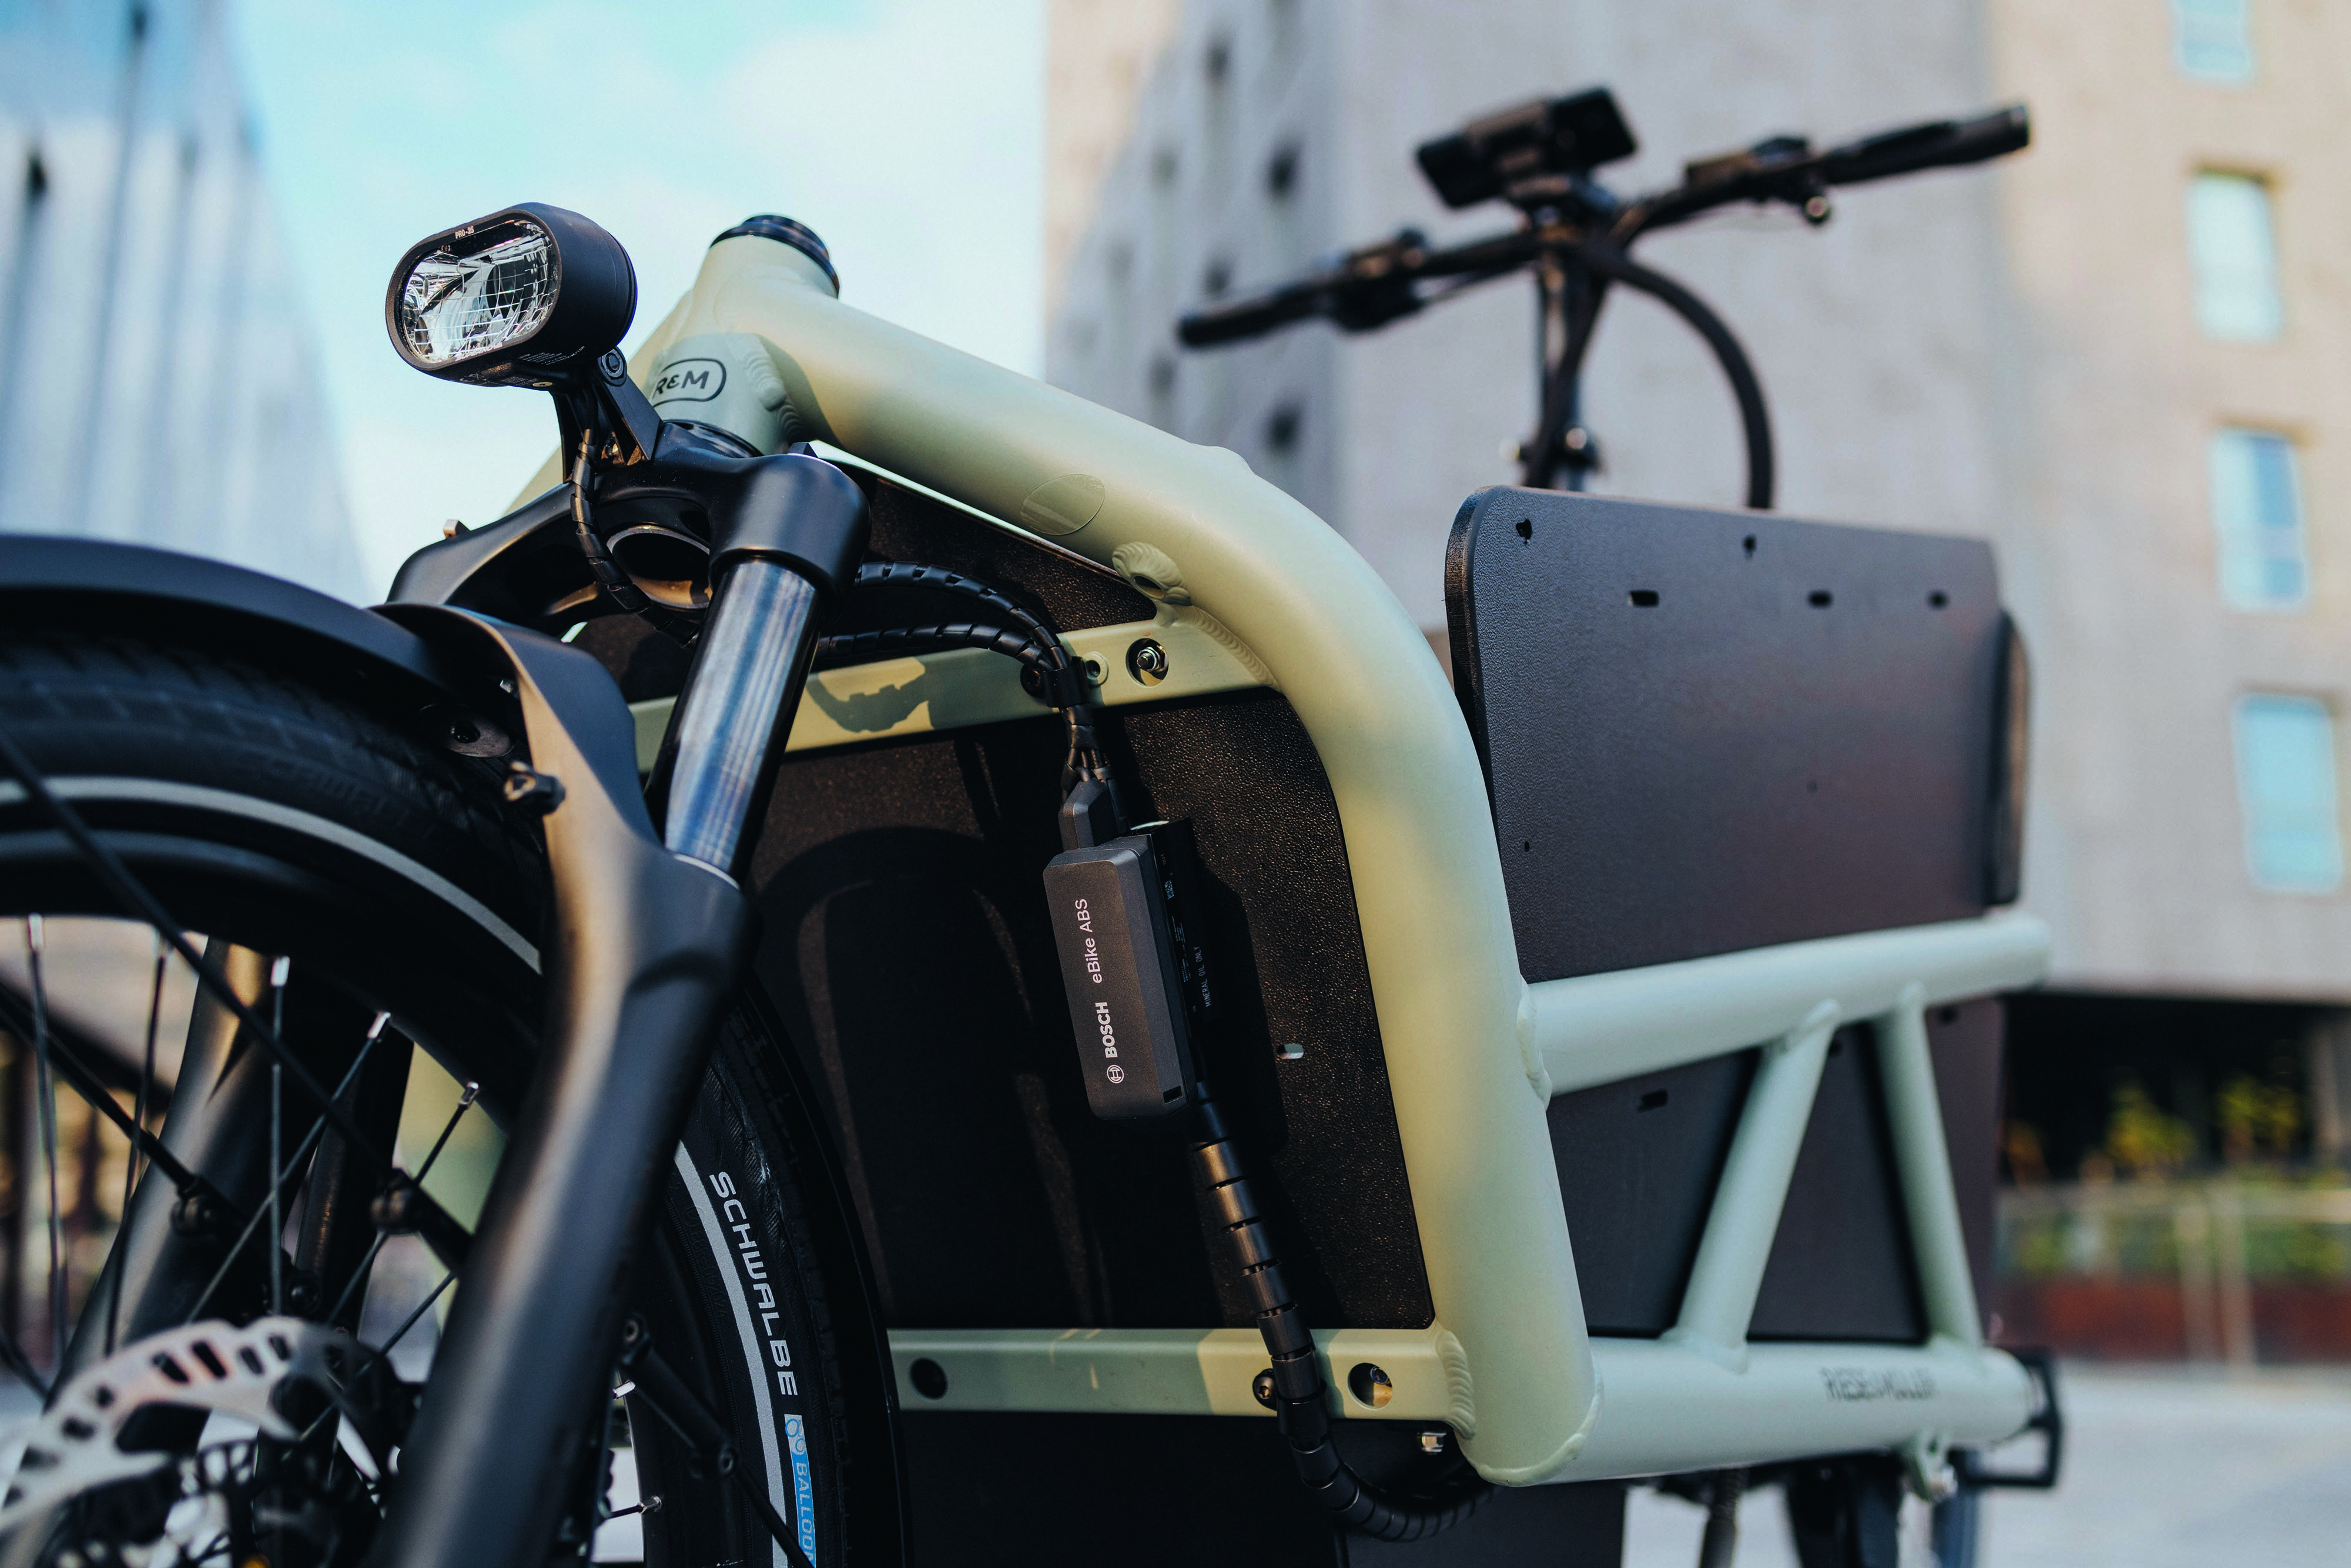 To enable eBikers to brake even more safely, Bosch eBike Systems has developed the ABS Cargo function specifically for cargo bikes. 